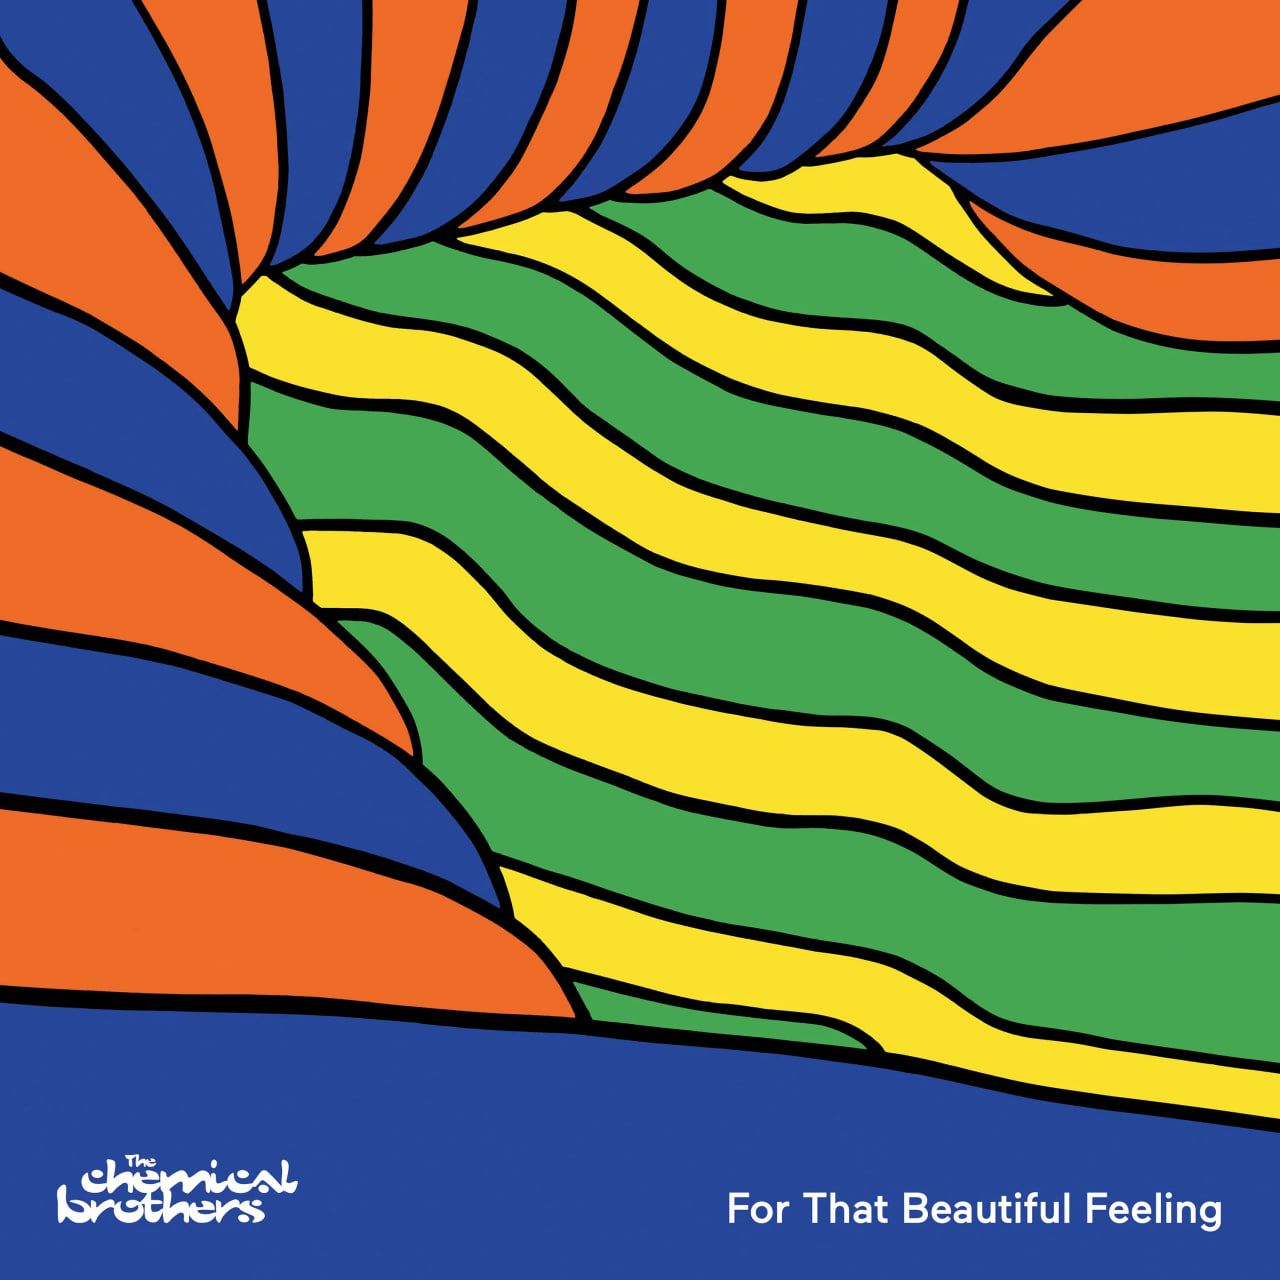 Электроника Virgin The Chemical Brothers - For That Beautiful Feeling (Black Vinyl 2LP) электроника umc universal uk chemical brothers the dig your own hole